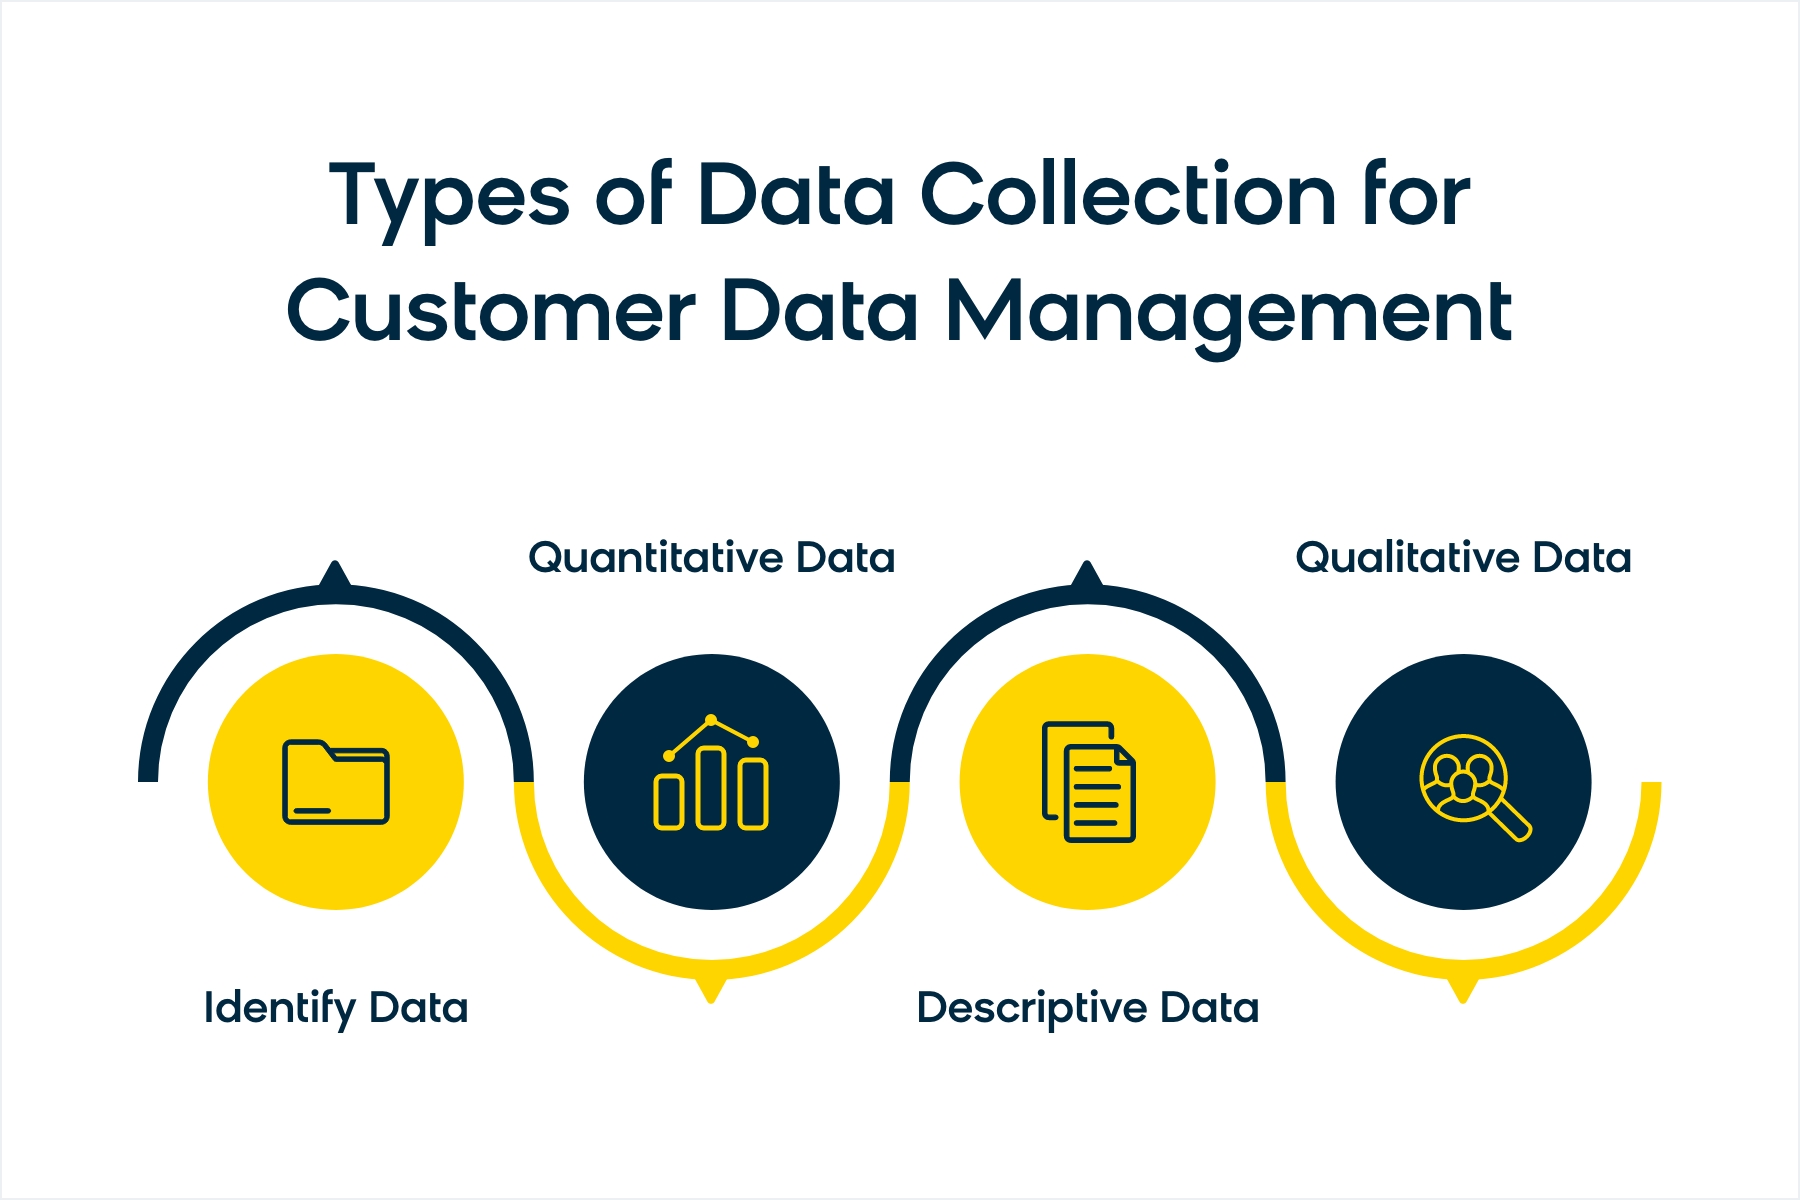 The 4 types of data collection for customer data management: identity, quantitative, descriptive, and qualitative data